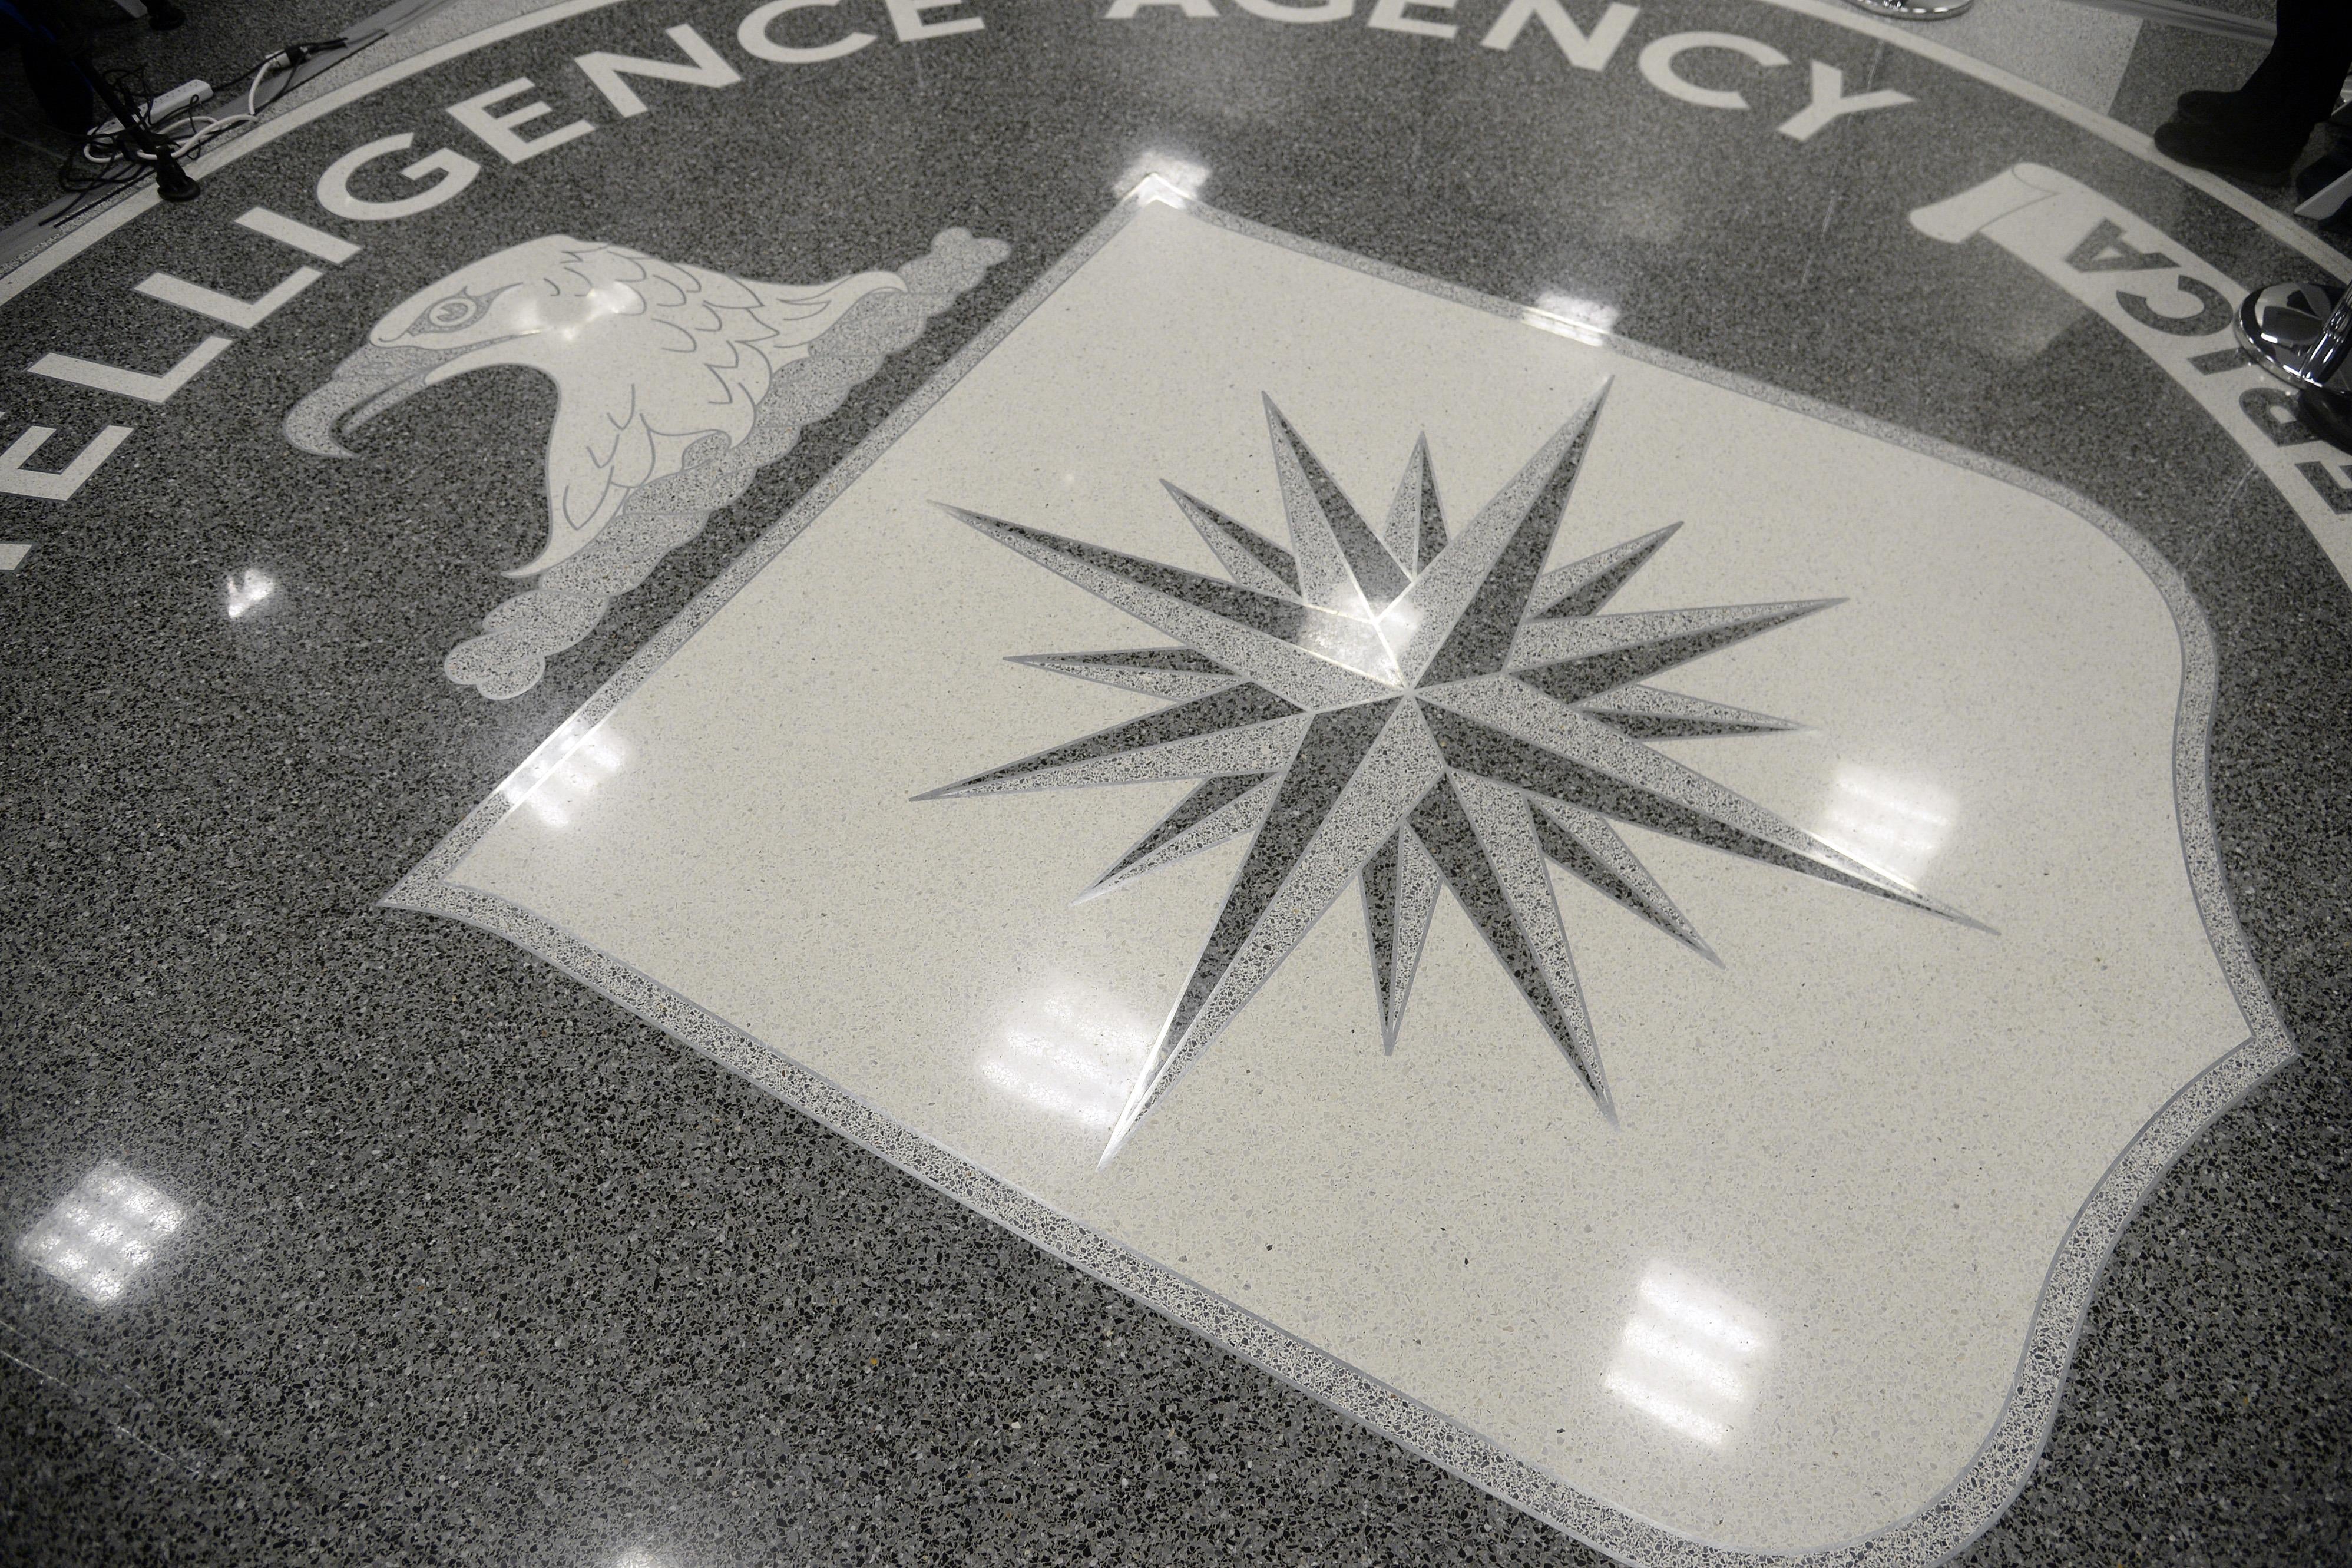  CIA headquarters on January 21, 2017 in Langley, Virginia